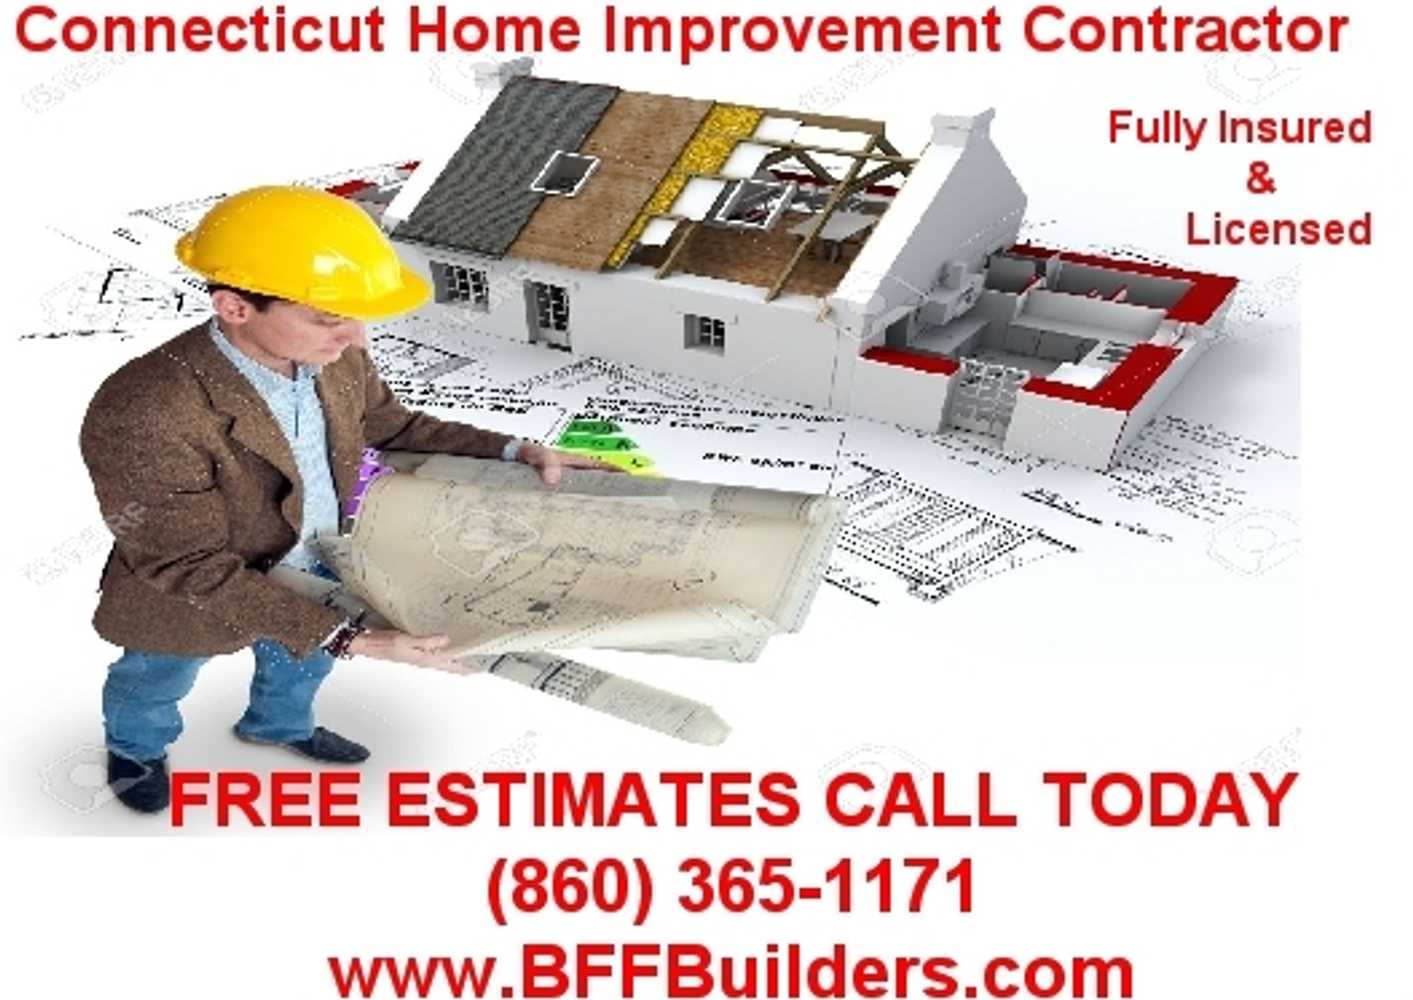 Photos from BFF Builders - Contractors